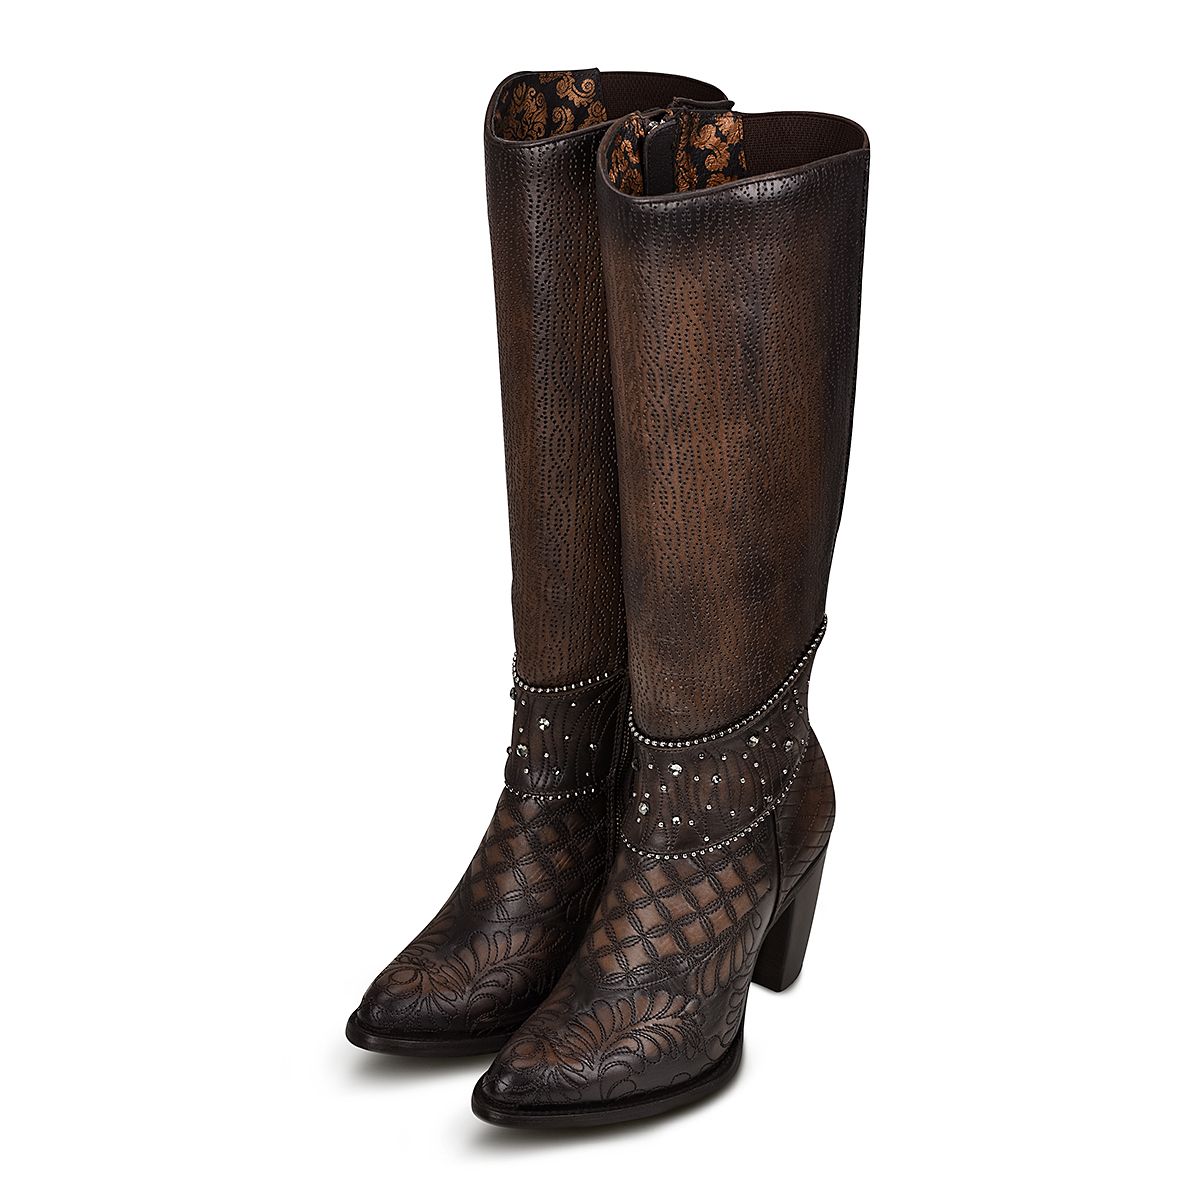 3F80RS - Cuadra black and brown Paris Texas fashion boots for women-Kuet.us